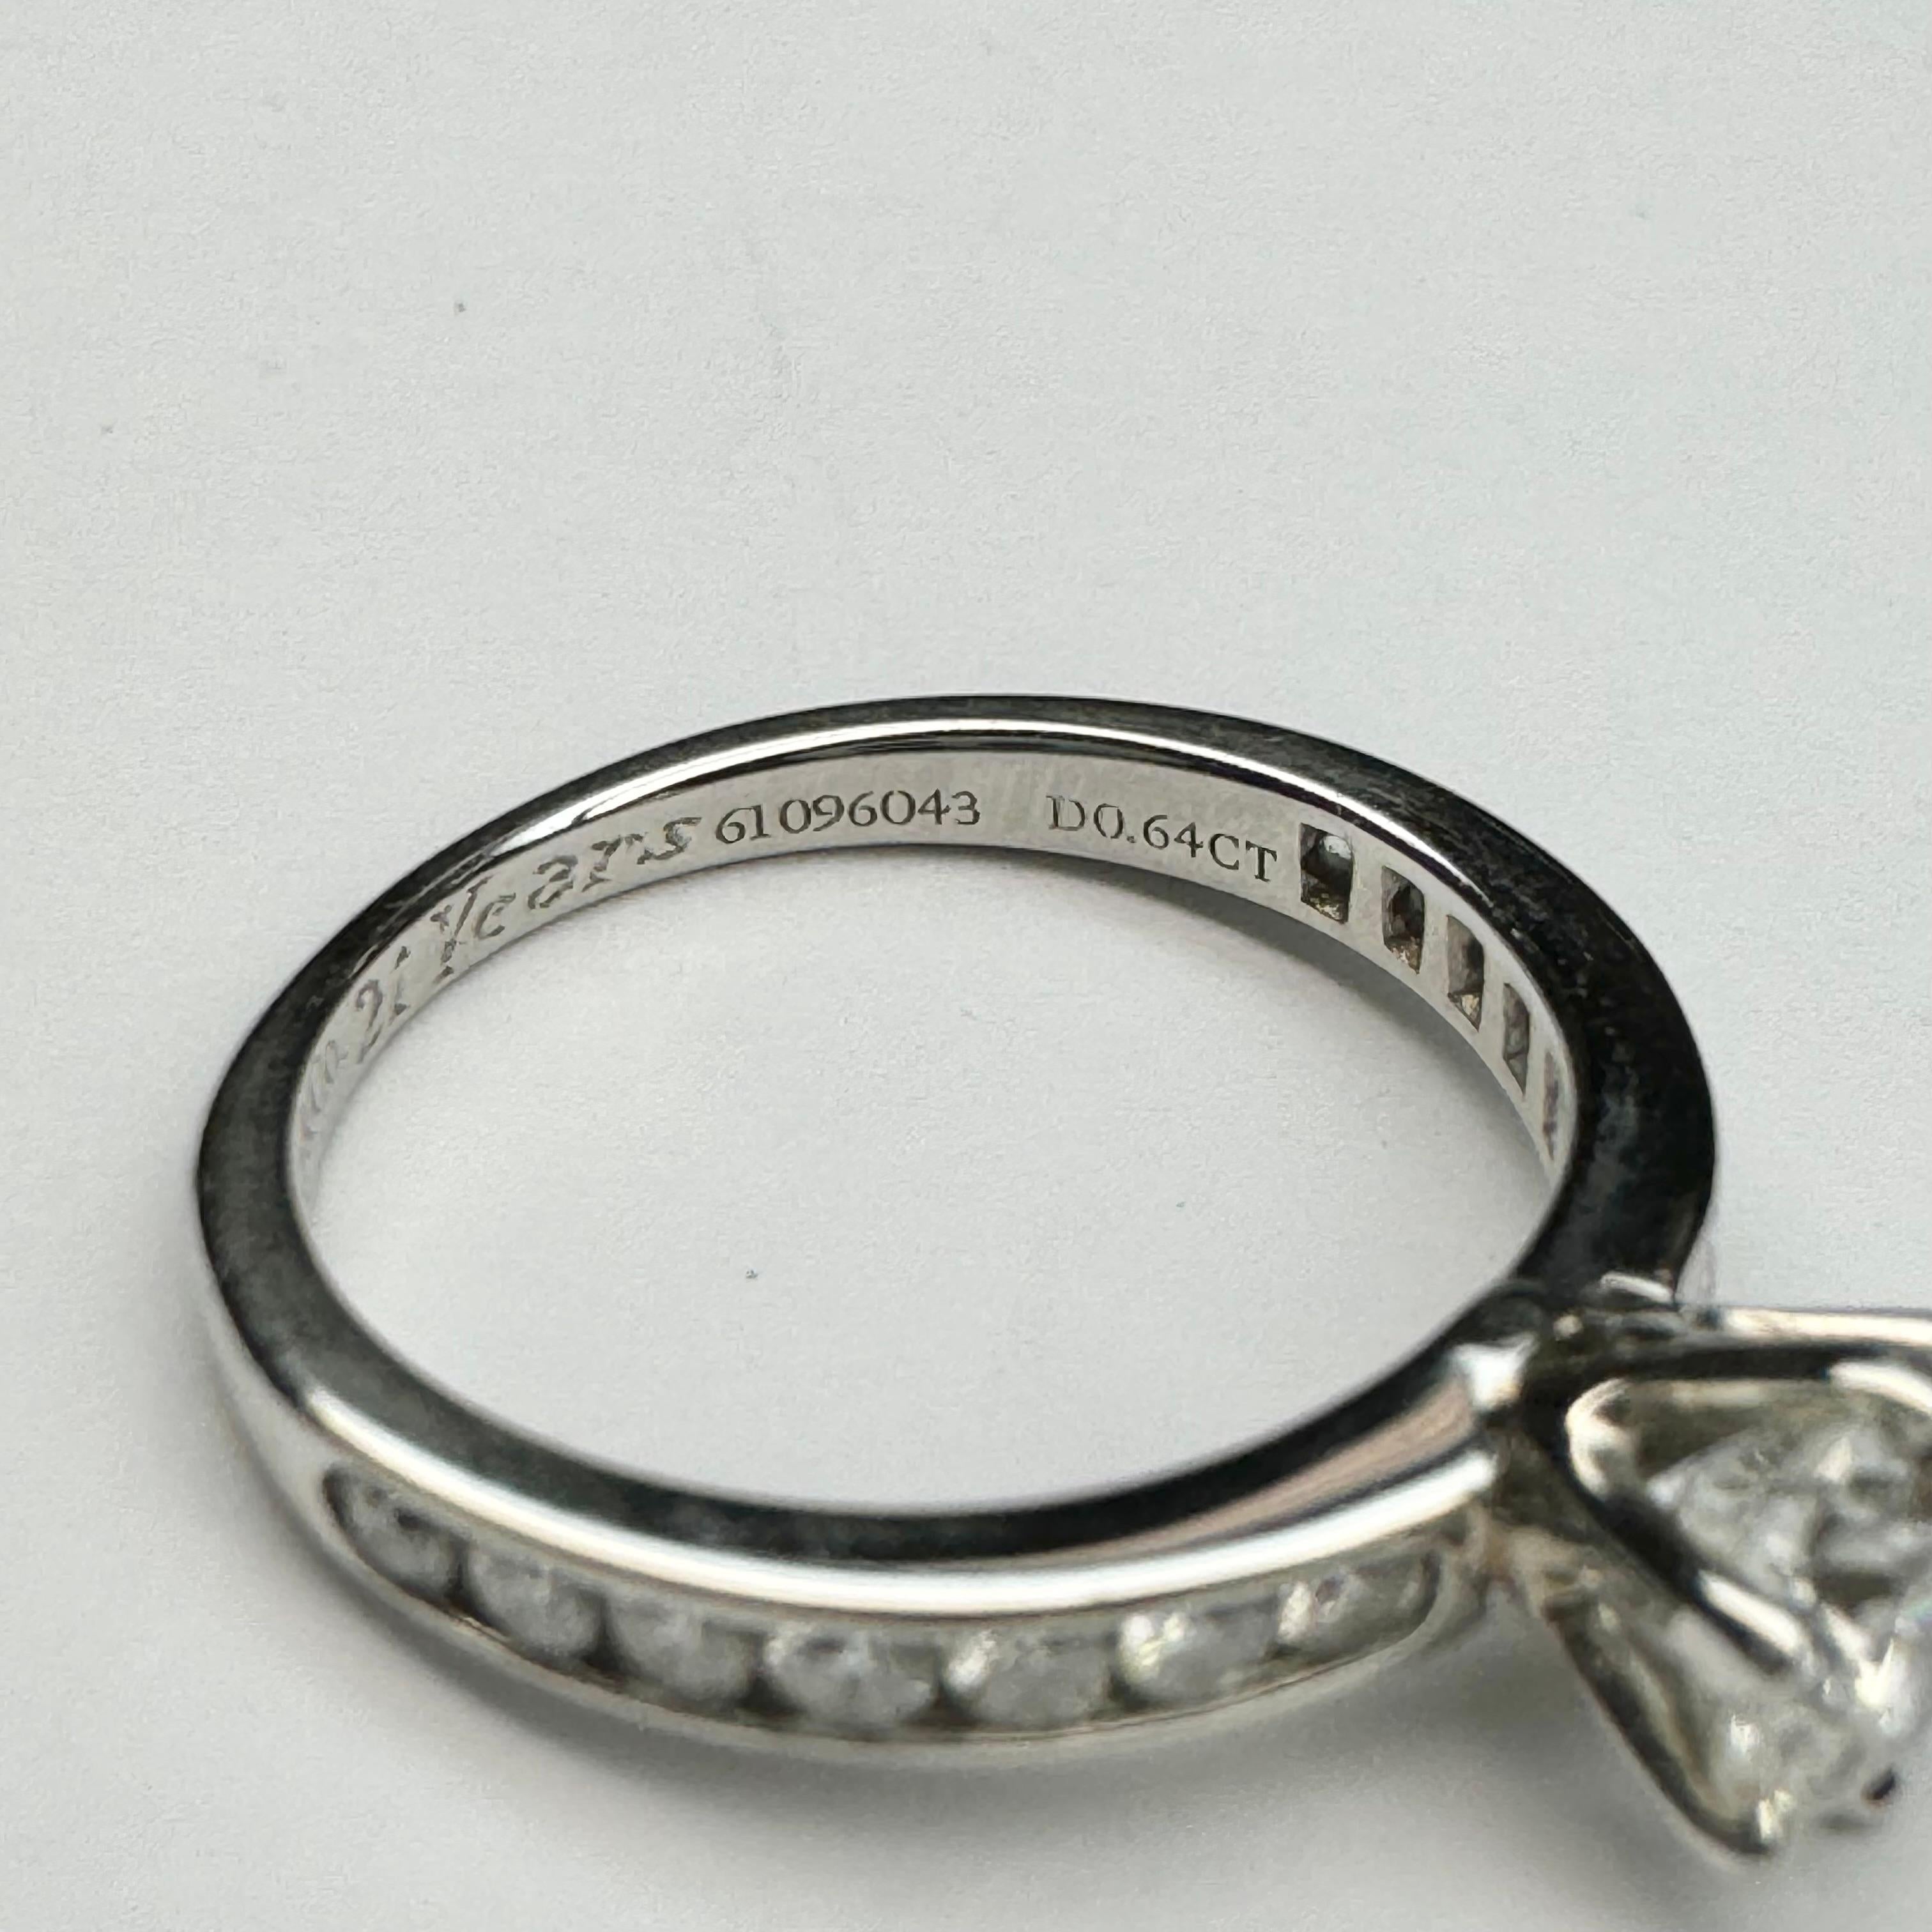 Tiffany & Co. 0.64ct Diamond Ring In Good Condition For Sale In New York, NY